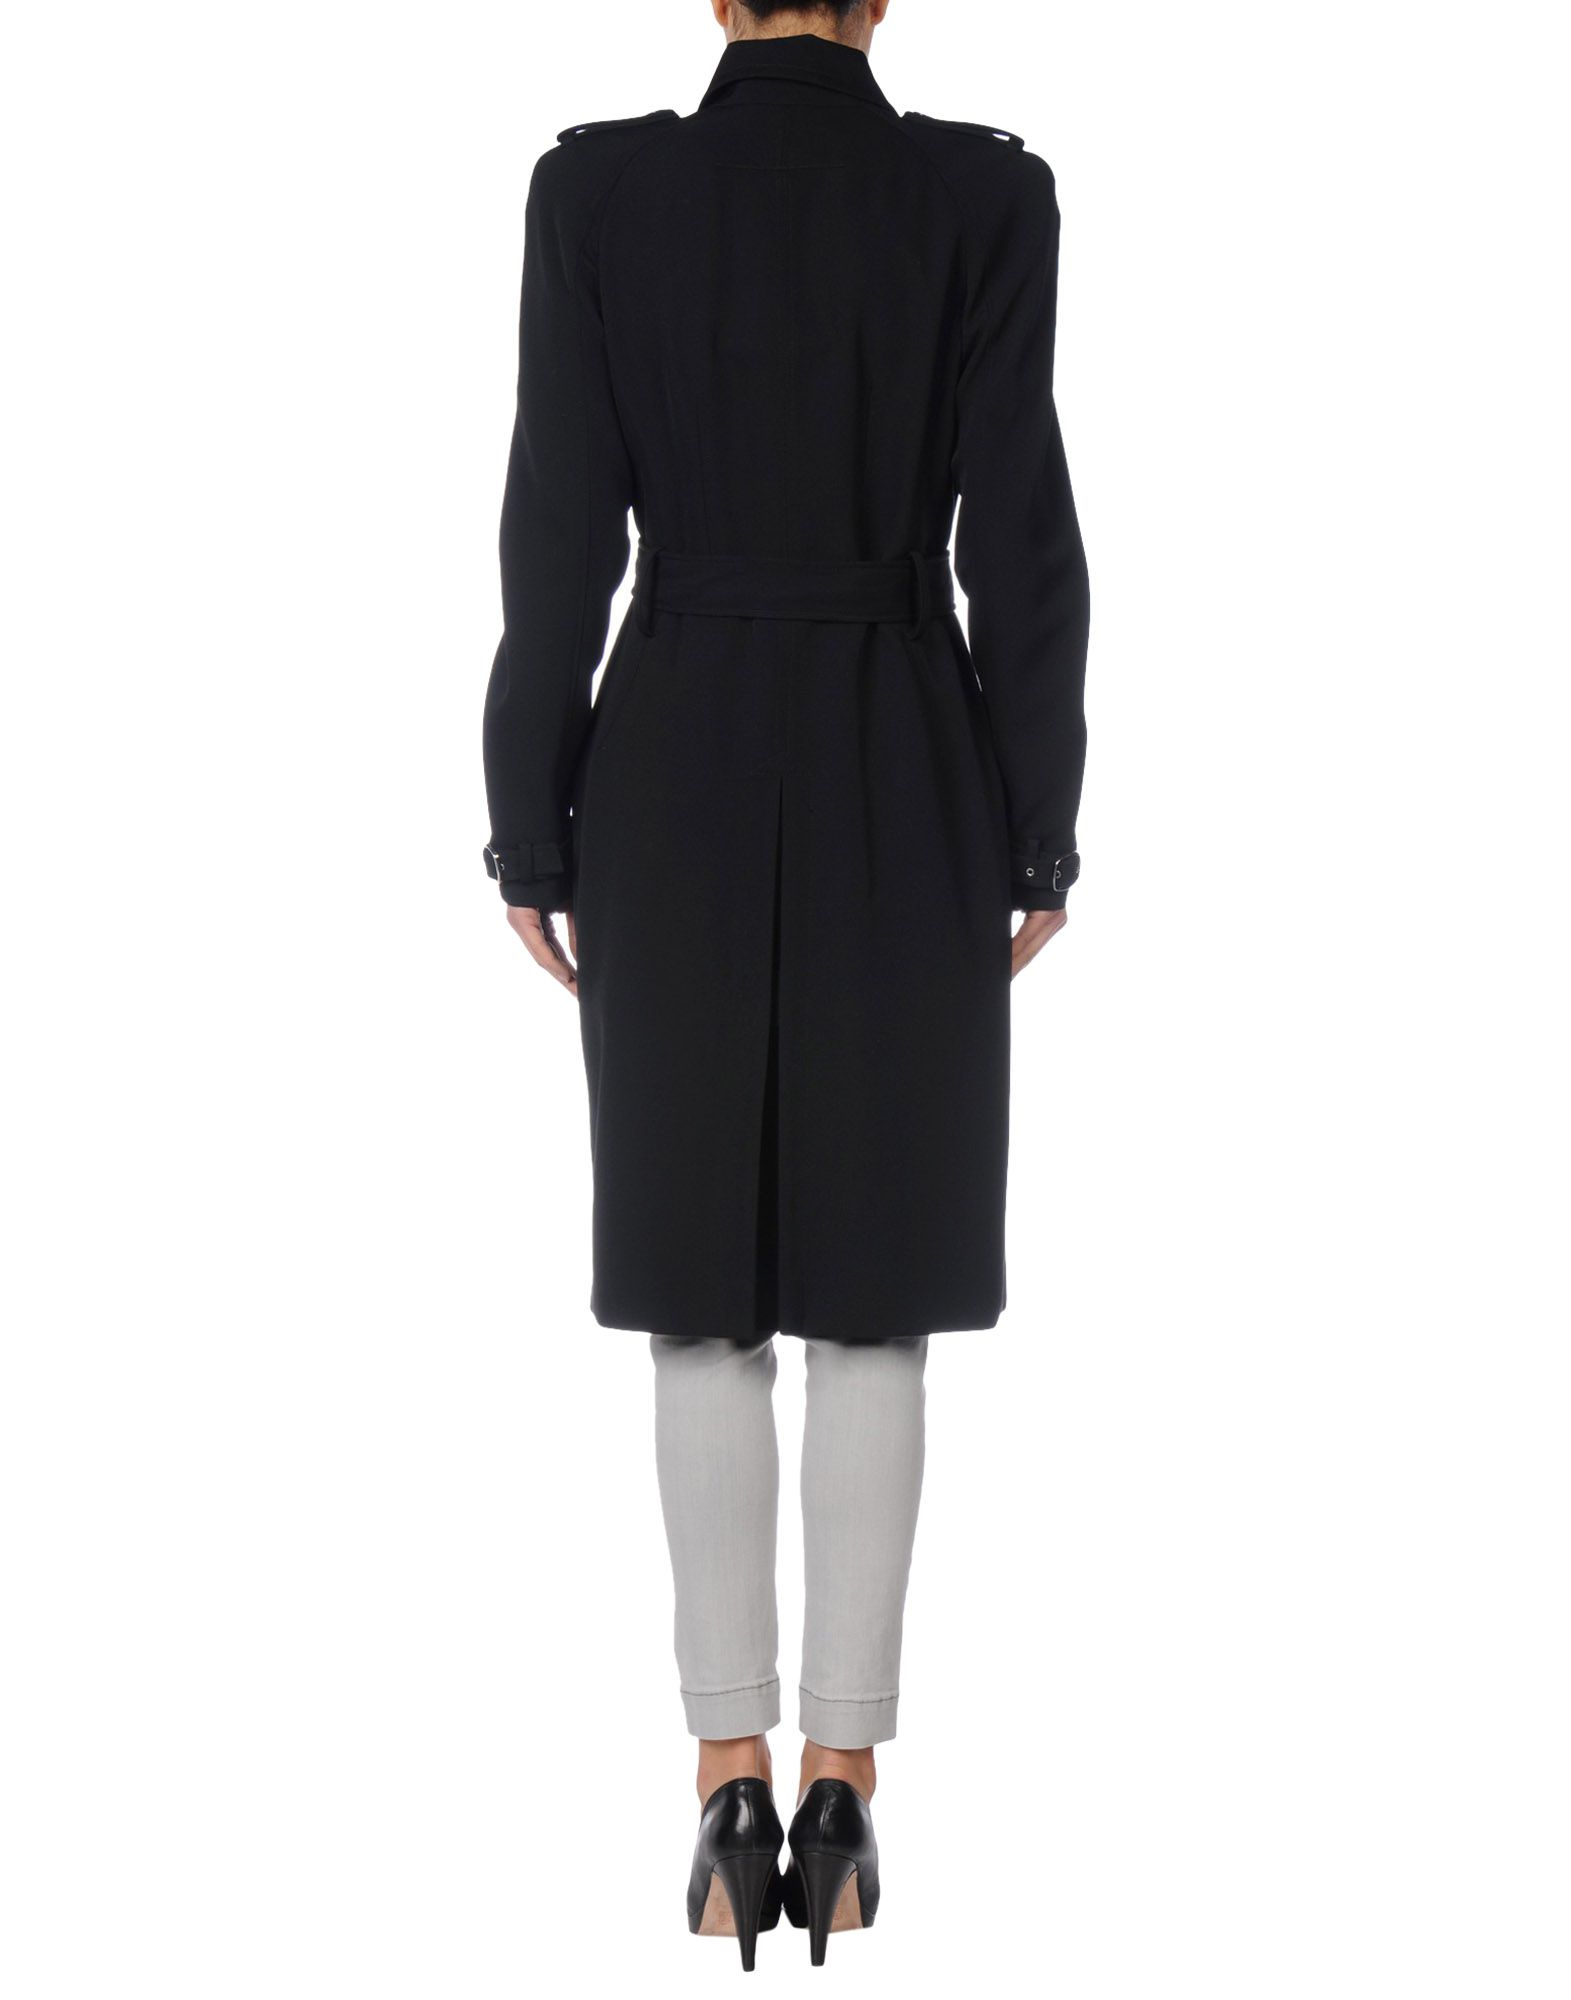 Givenchy Grain De Poudre Trench Coat in Black | Lyst